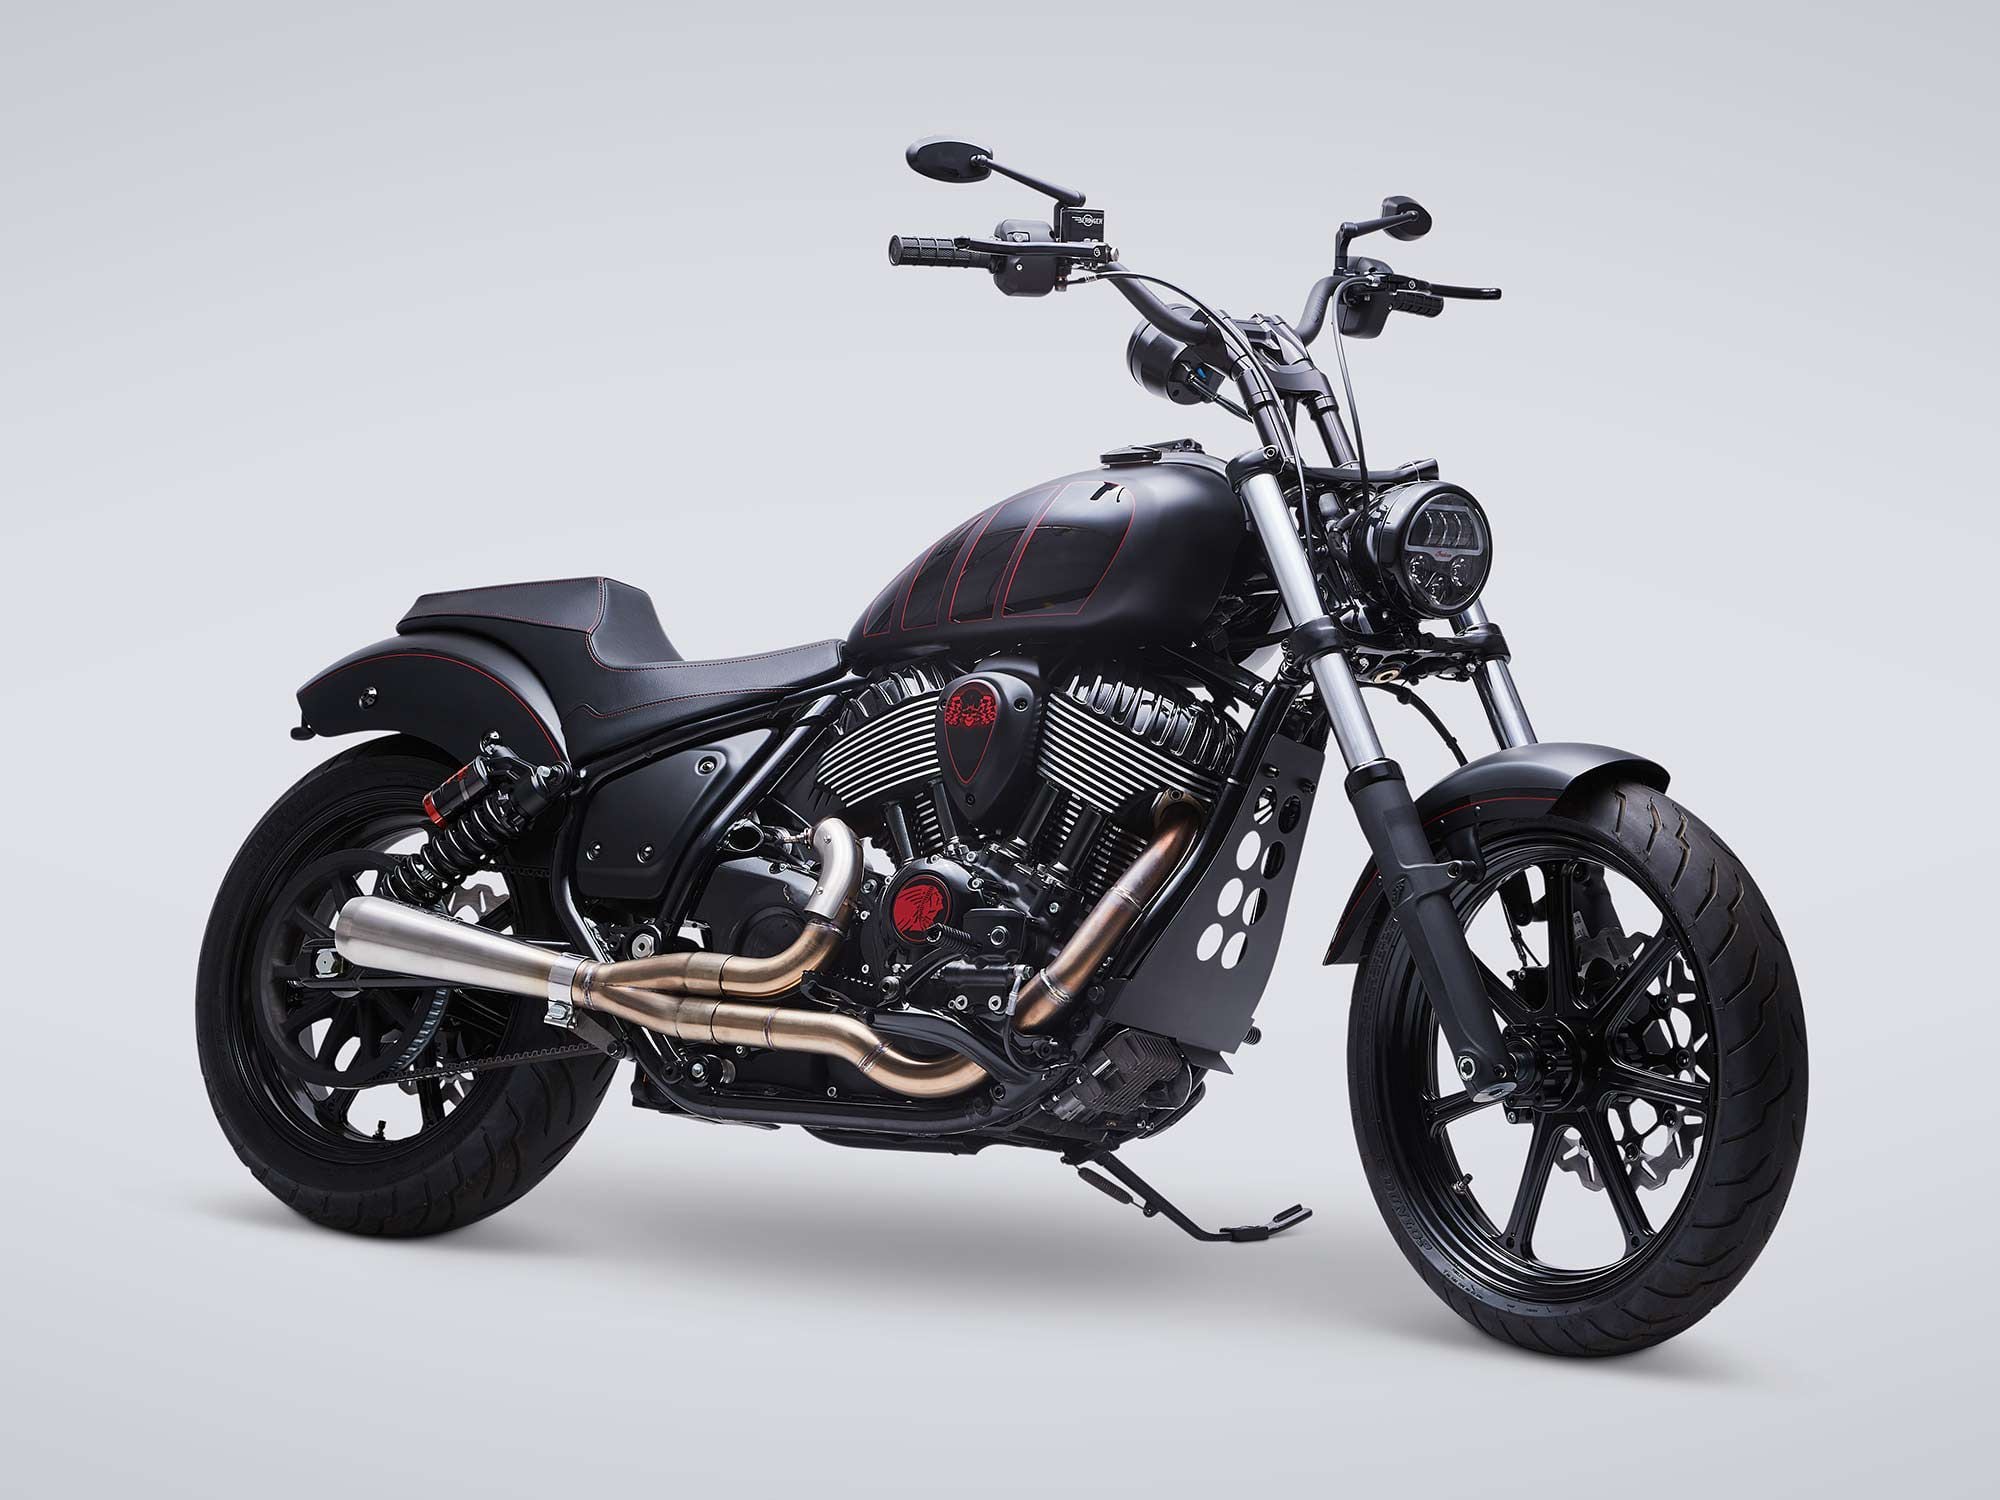 The bike is also the last installment in the 2022 Chief Custom Build Off contest Indian launched earlier this year.